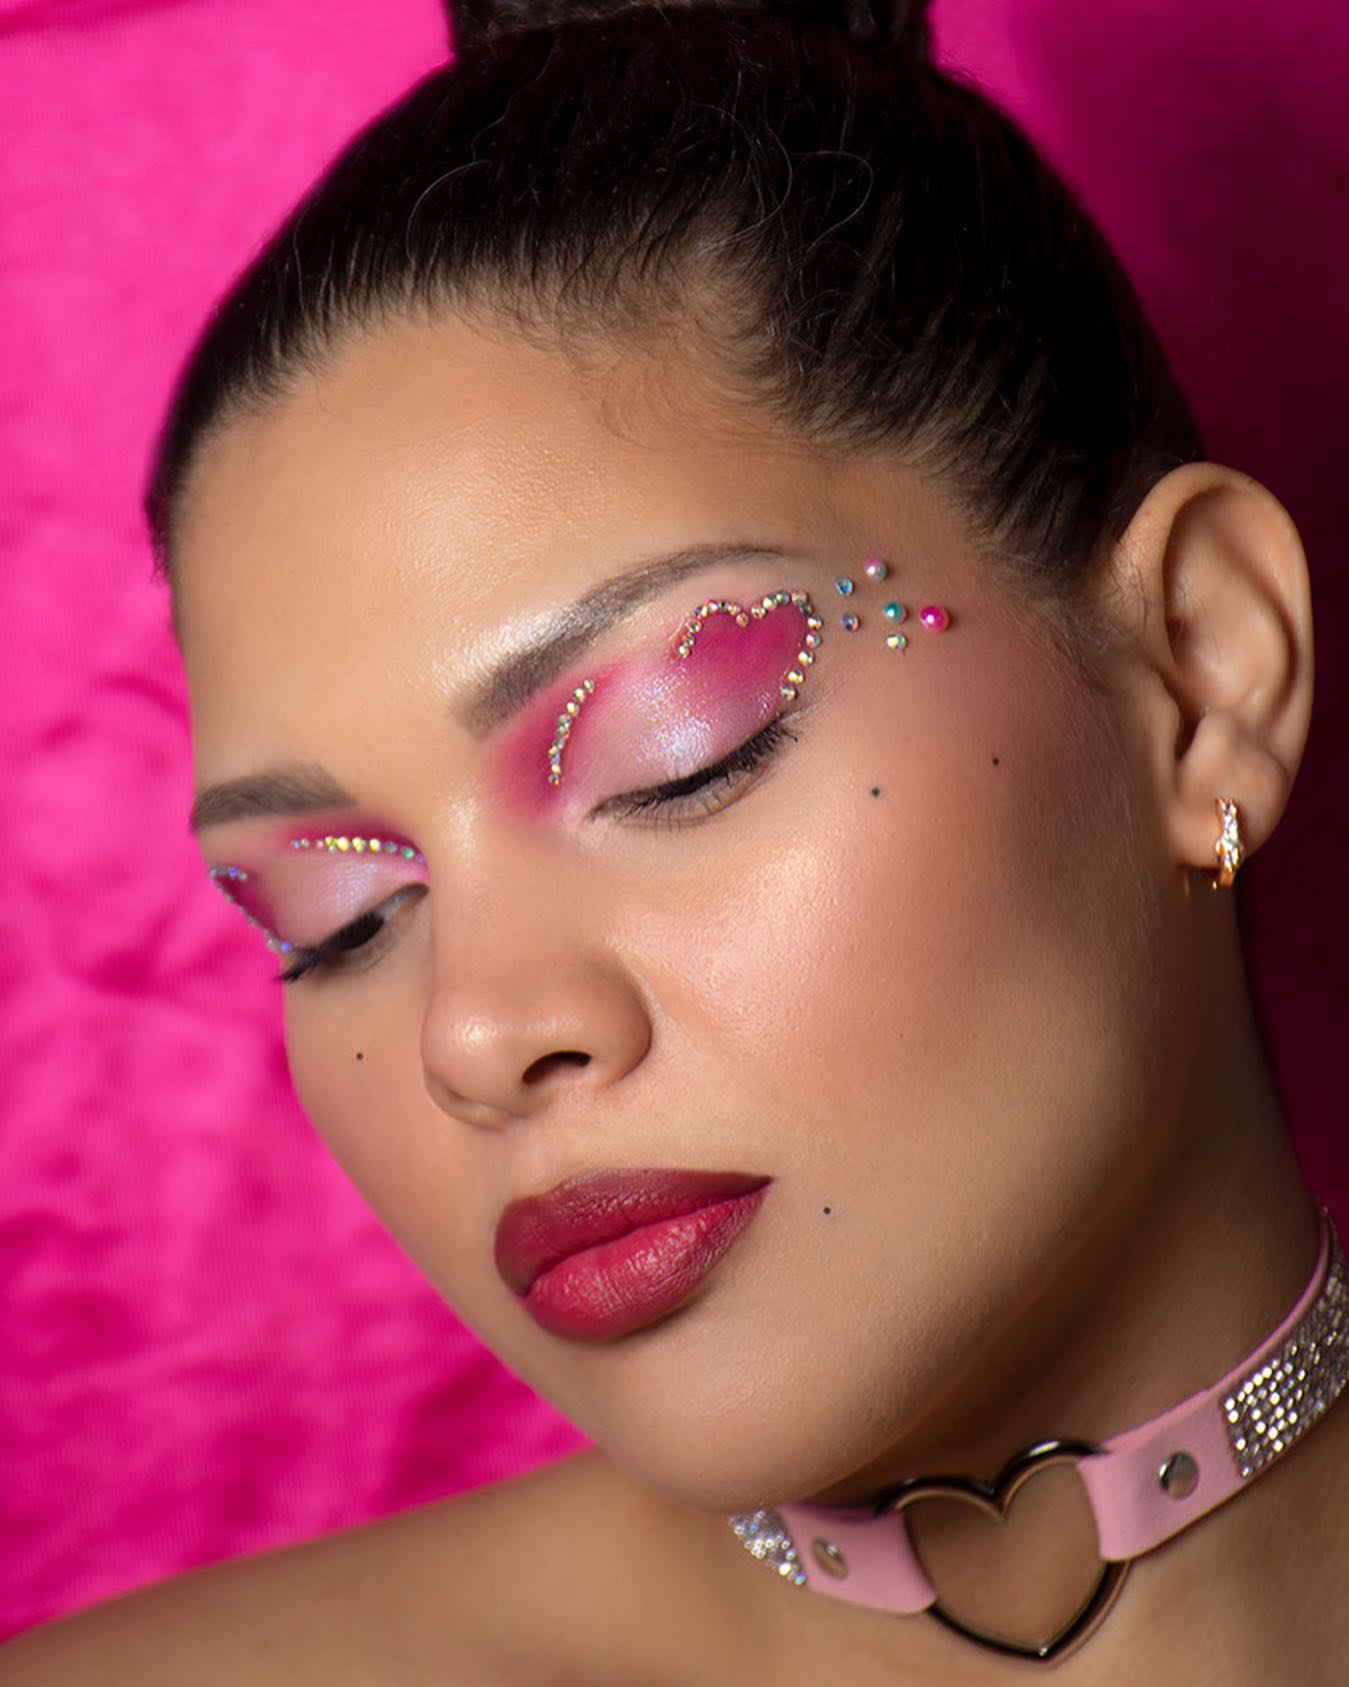 Barbie Blush Is the Prettiest Way to Wear the Hot Pink Makeup Trend